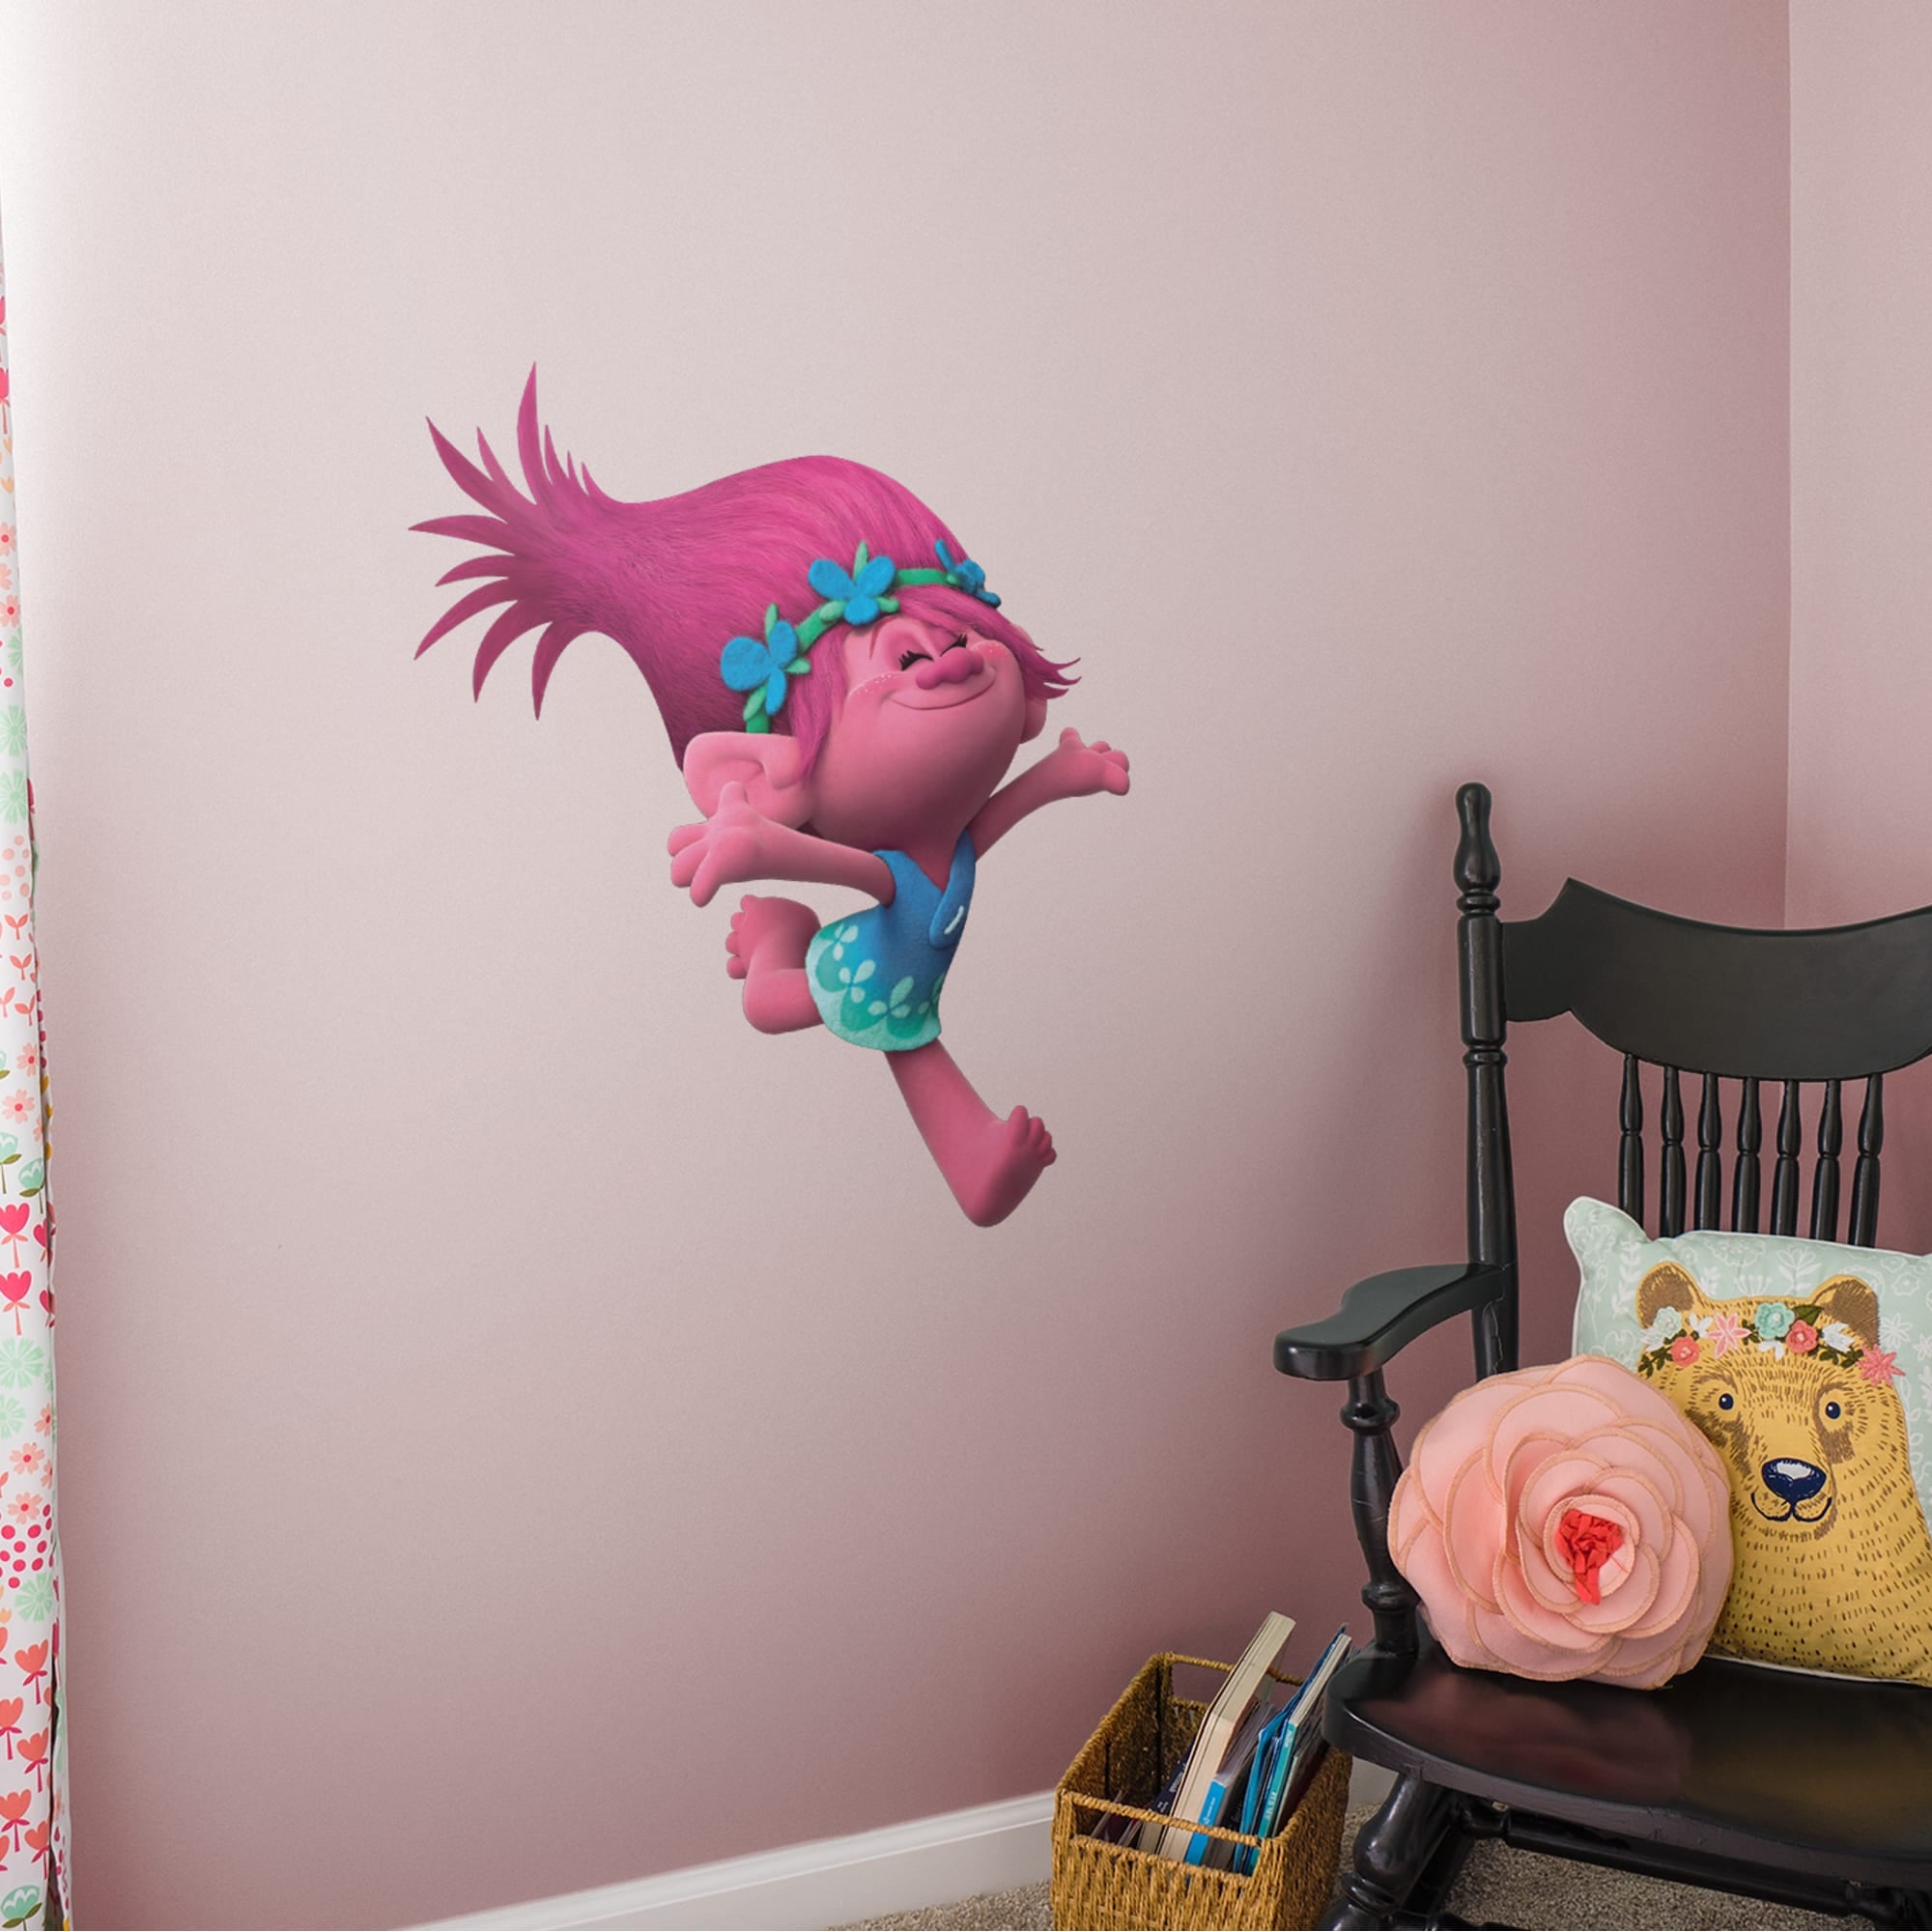 POPPY: TROLLS MOVIE - OFFICIALLY LICENSED REMOVABLE Wall DECAL 34.0"W x 33.0"H by Fathead | Vinyl